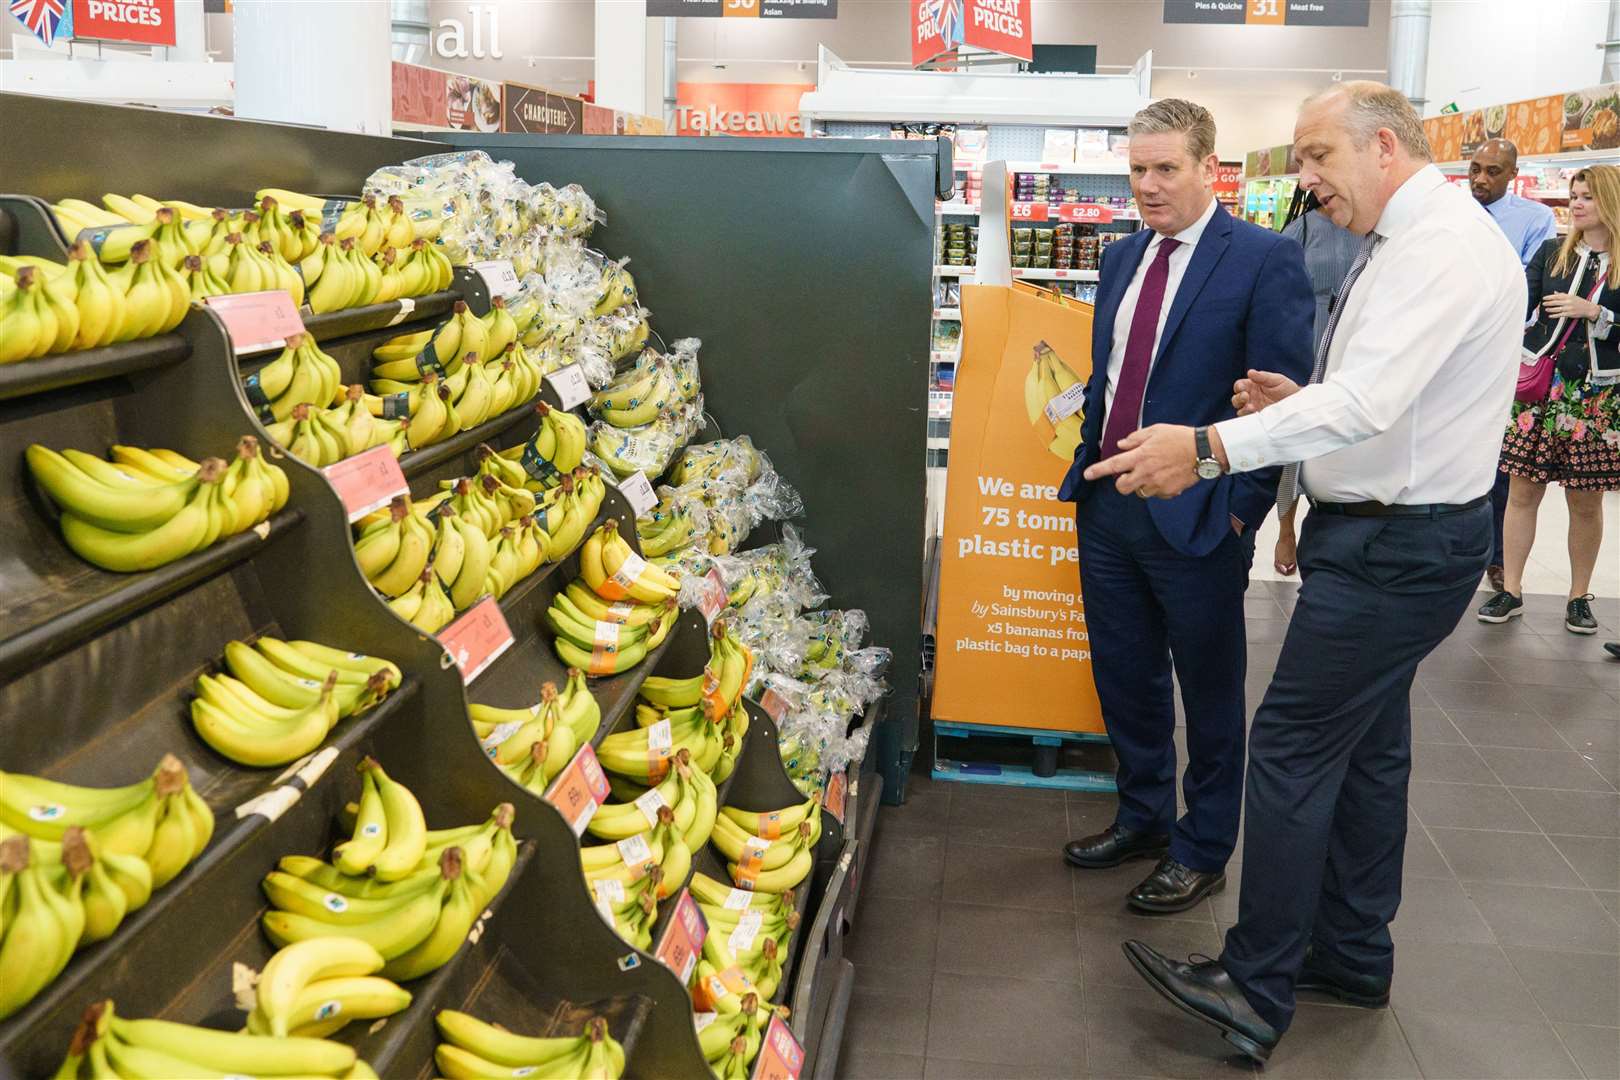 Sainsbury’s chief executive officer Simon Roberts (right) with Labour Party leader Sir Keir Starmer in May (Dominic Lipinski/PA)